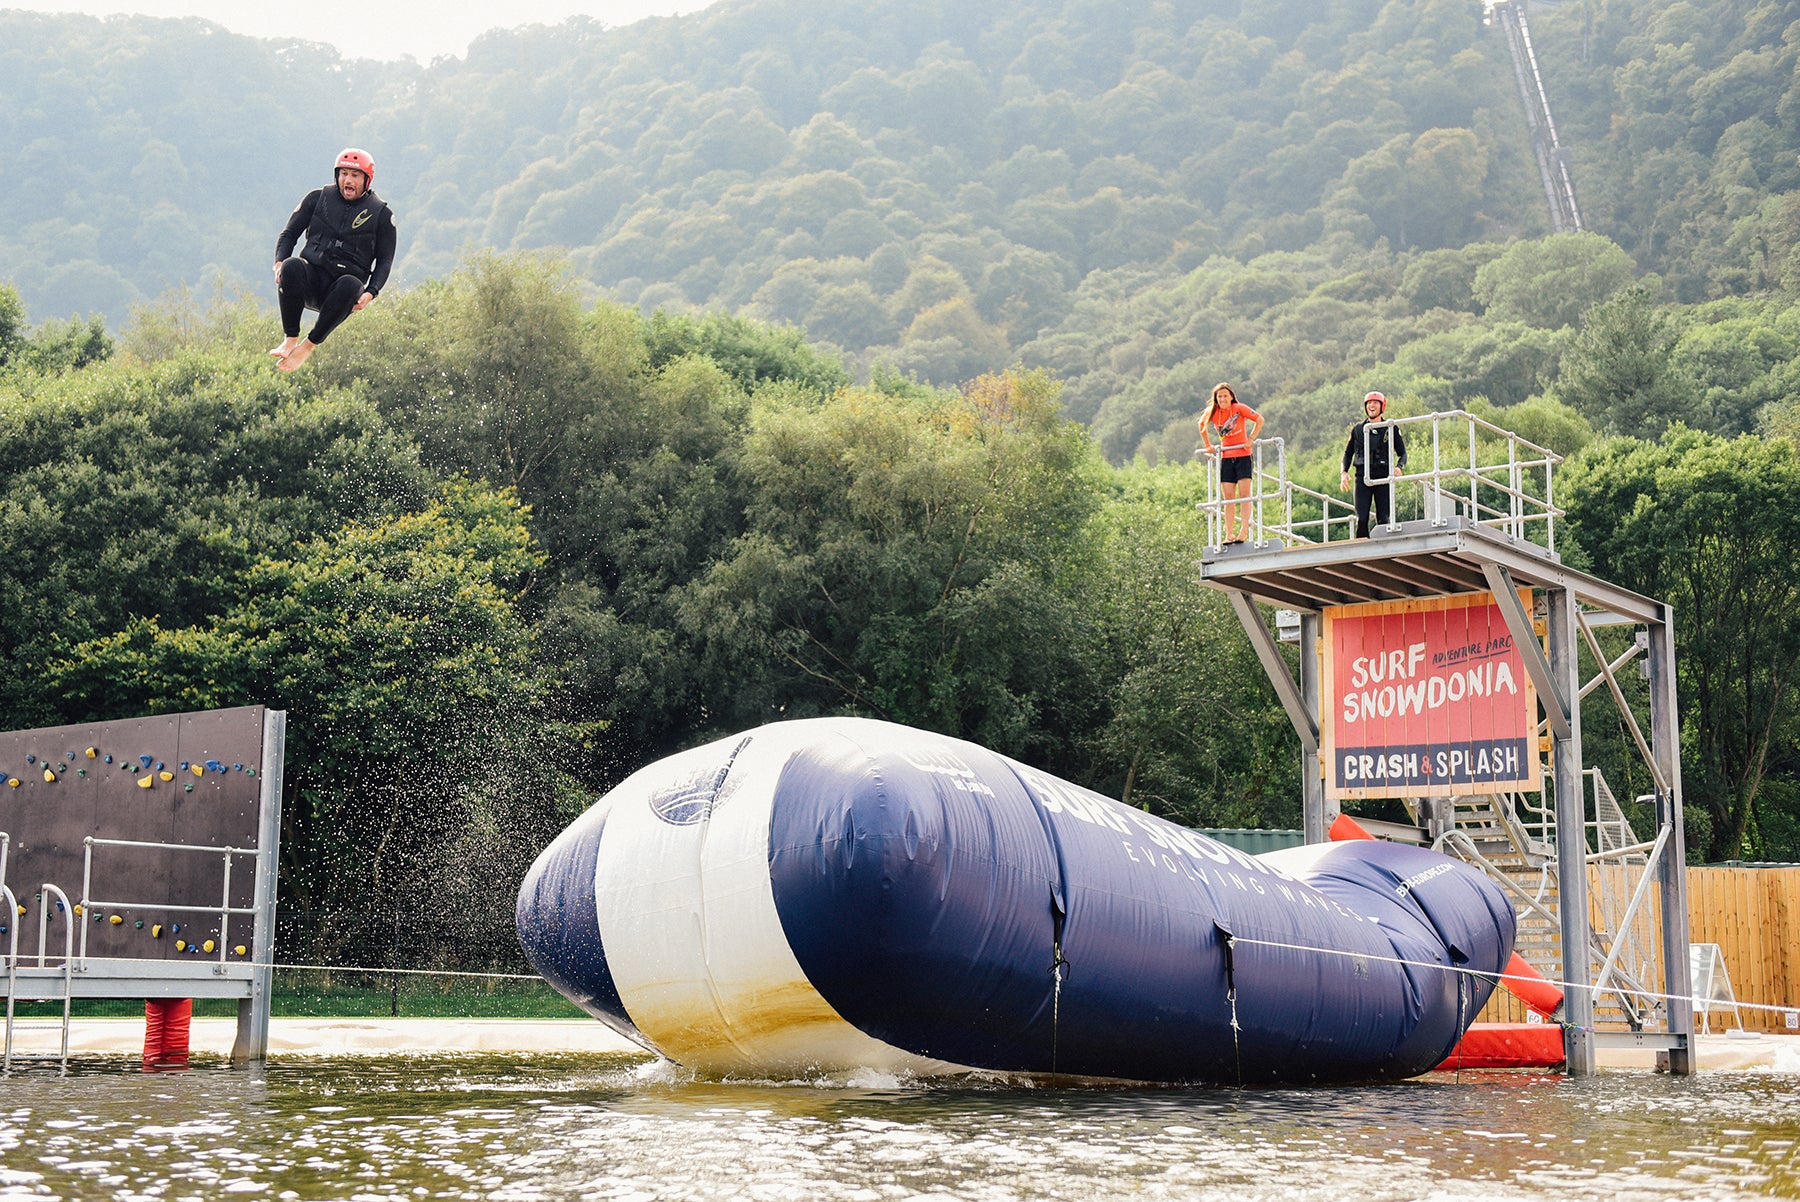 For those not keen on surfing, the Blob is adrenaline-fuelled fun